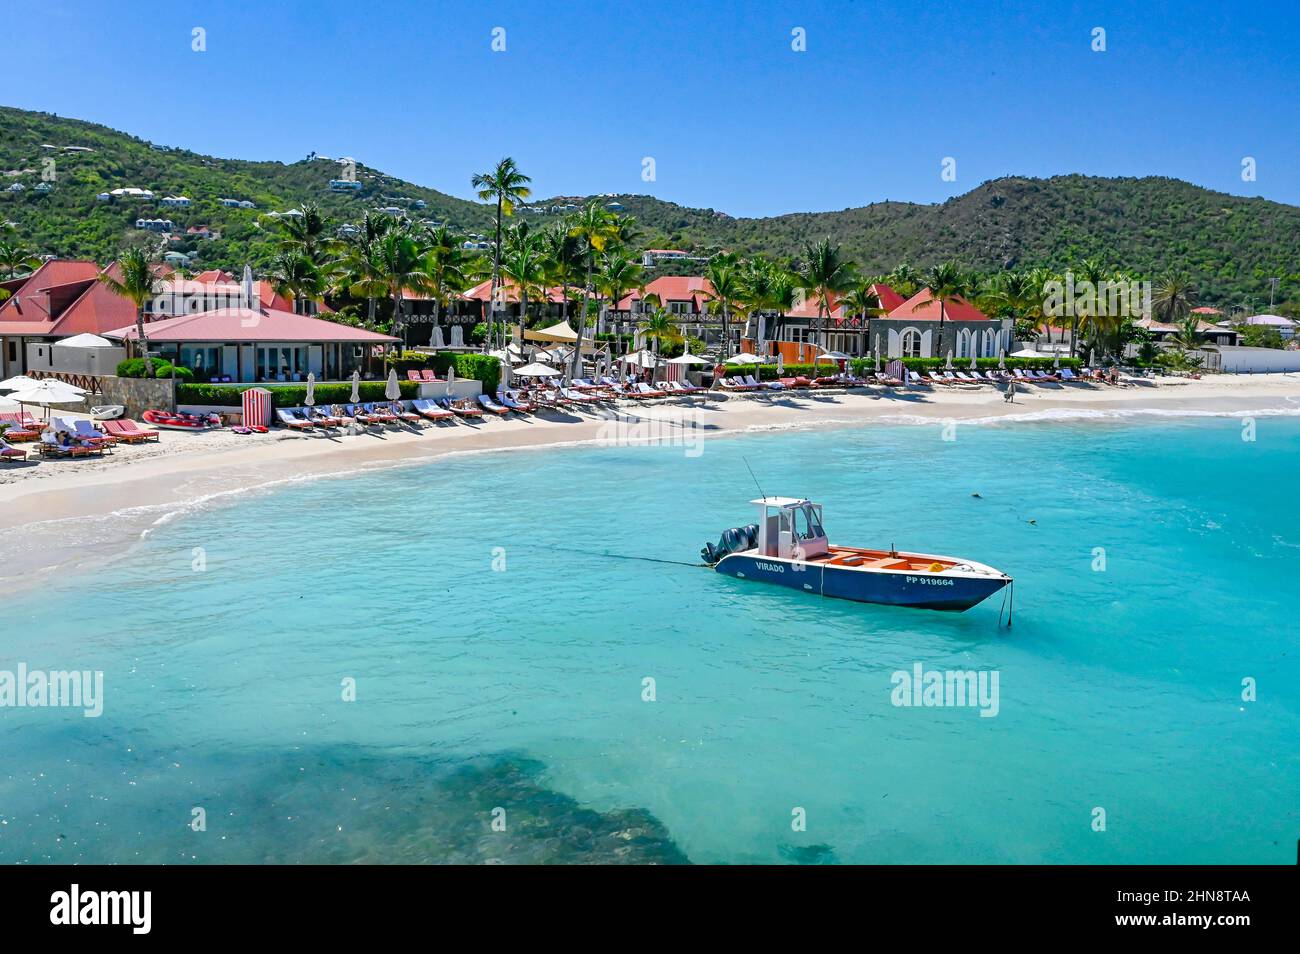 The Eden Rock Hotel at the bay of Saint-Jean on the Caribbean island of Saint-Barthélemy (St Barths) in the French West Indies Stock Photo